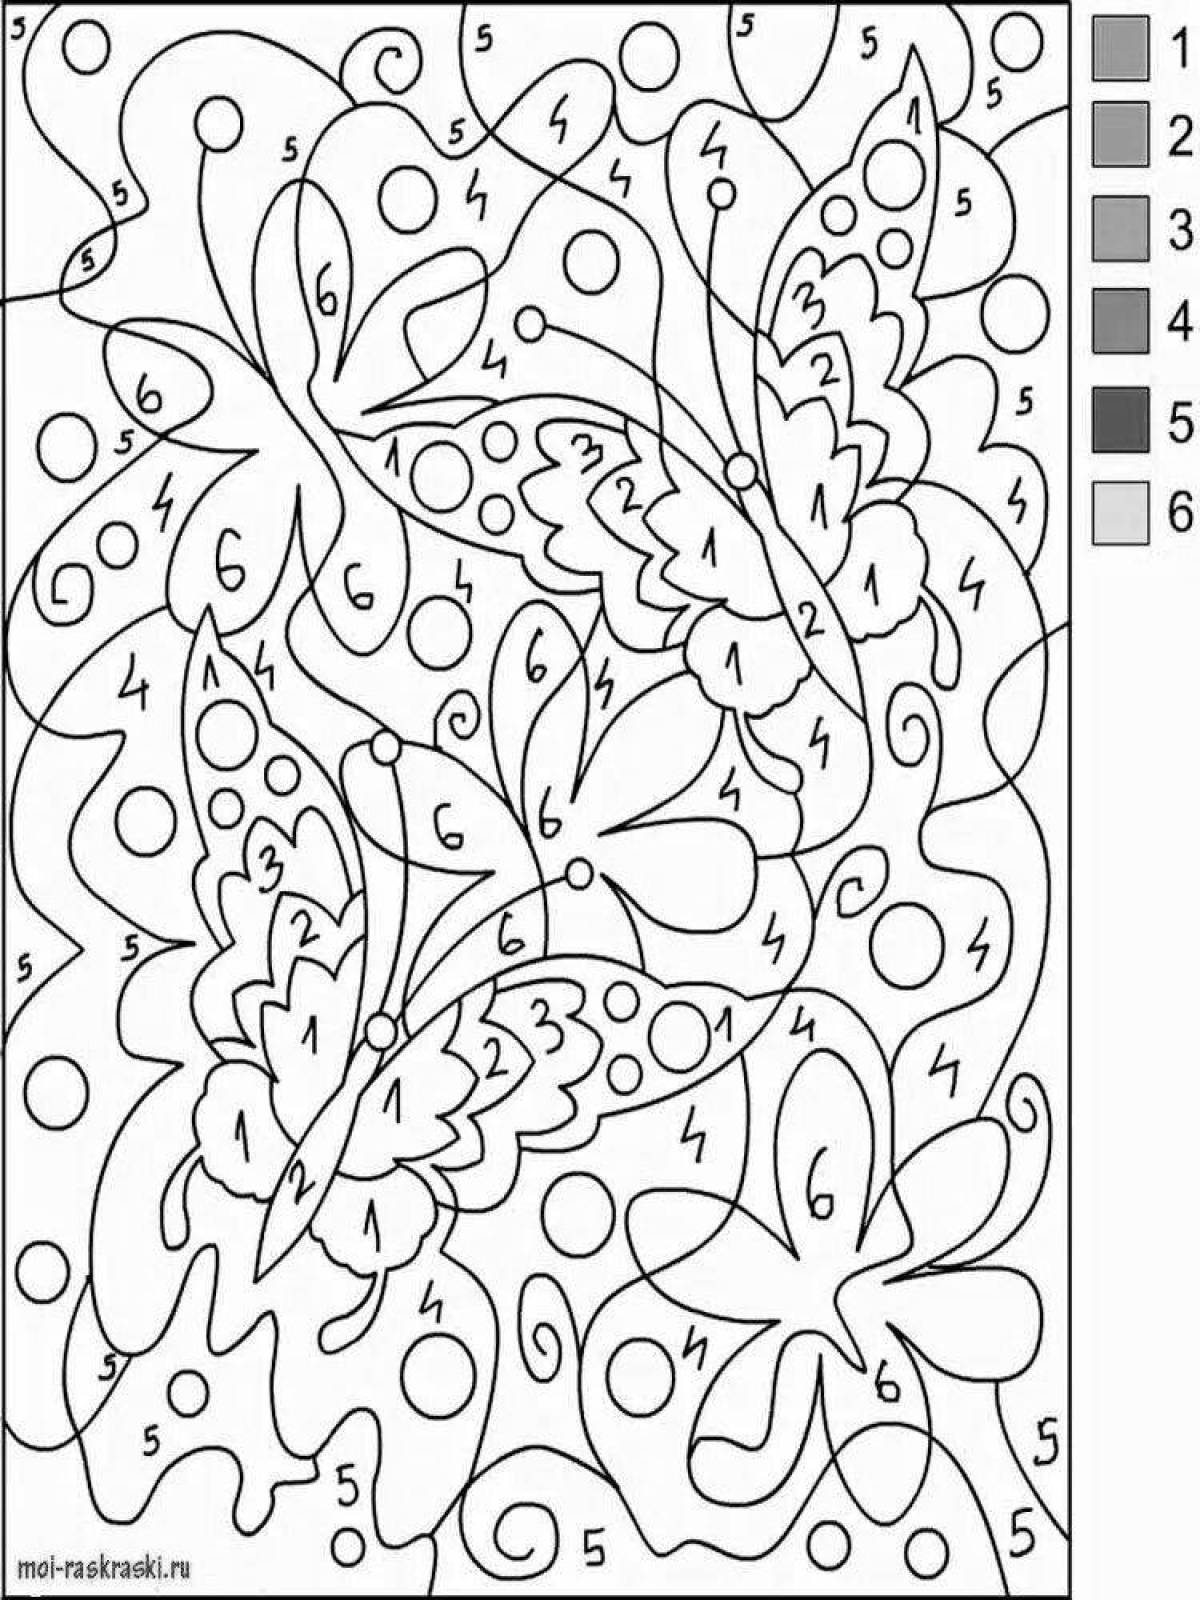 Violent coloring flowers by numbers